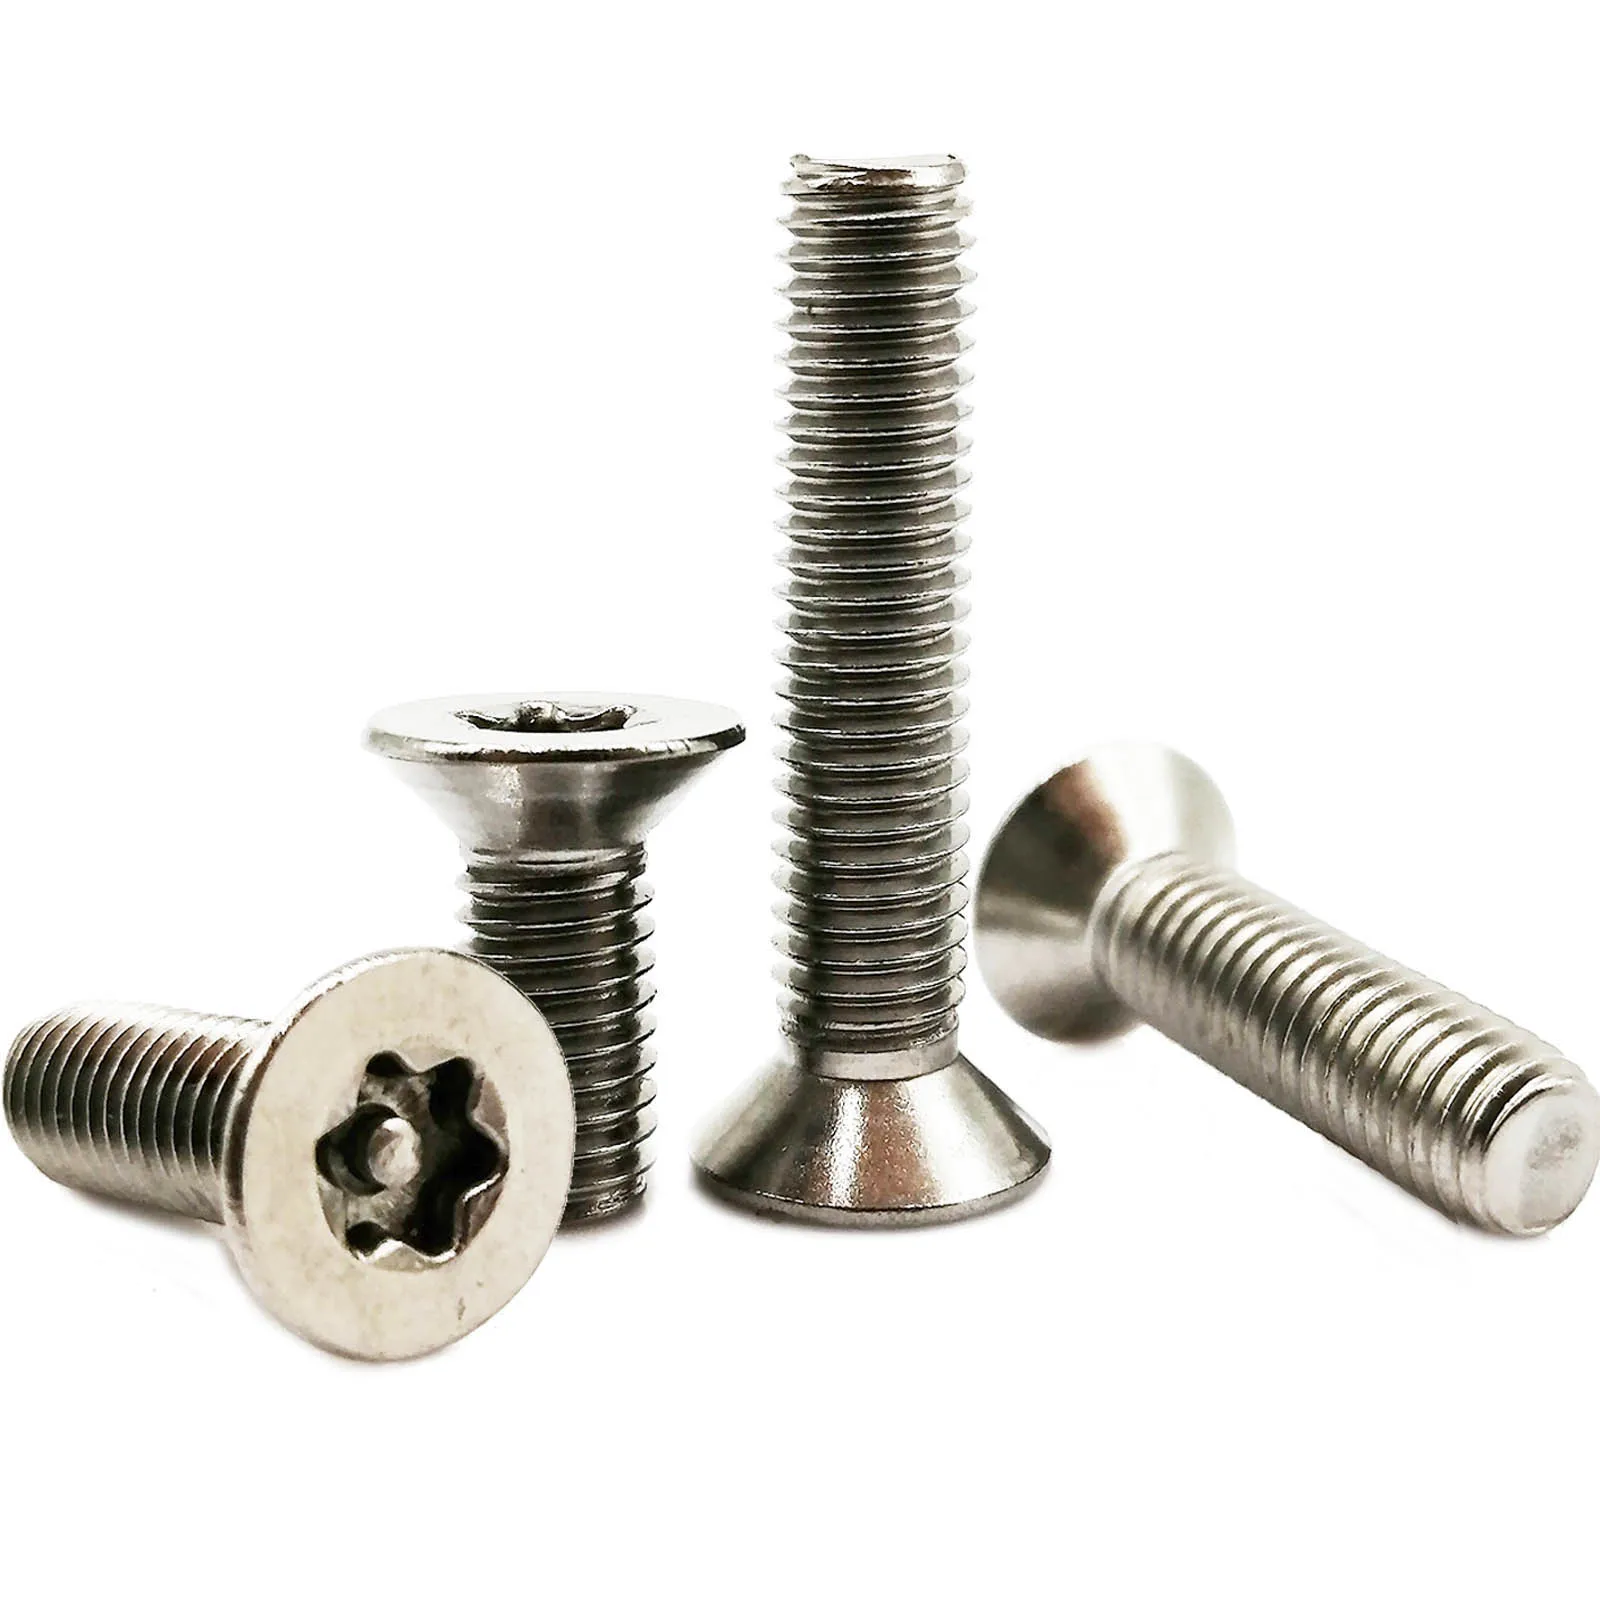 

M2 M2.5 M3 M4 M5 M6 M8 M10 M12 304 Stainless Steel Torx Flat Countersunk Head with Column Pin Tamper Proof Security Bolt Screw